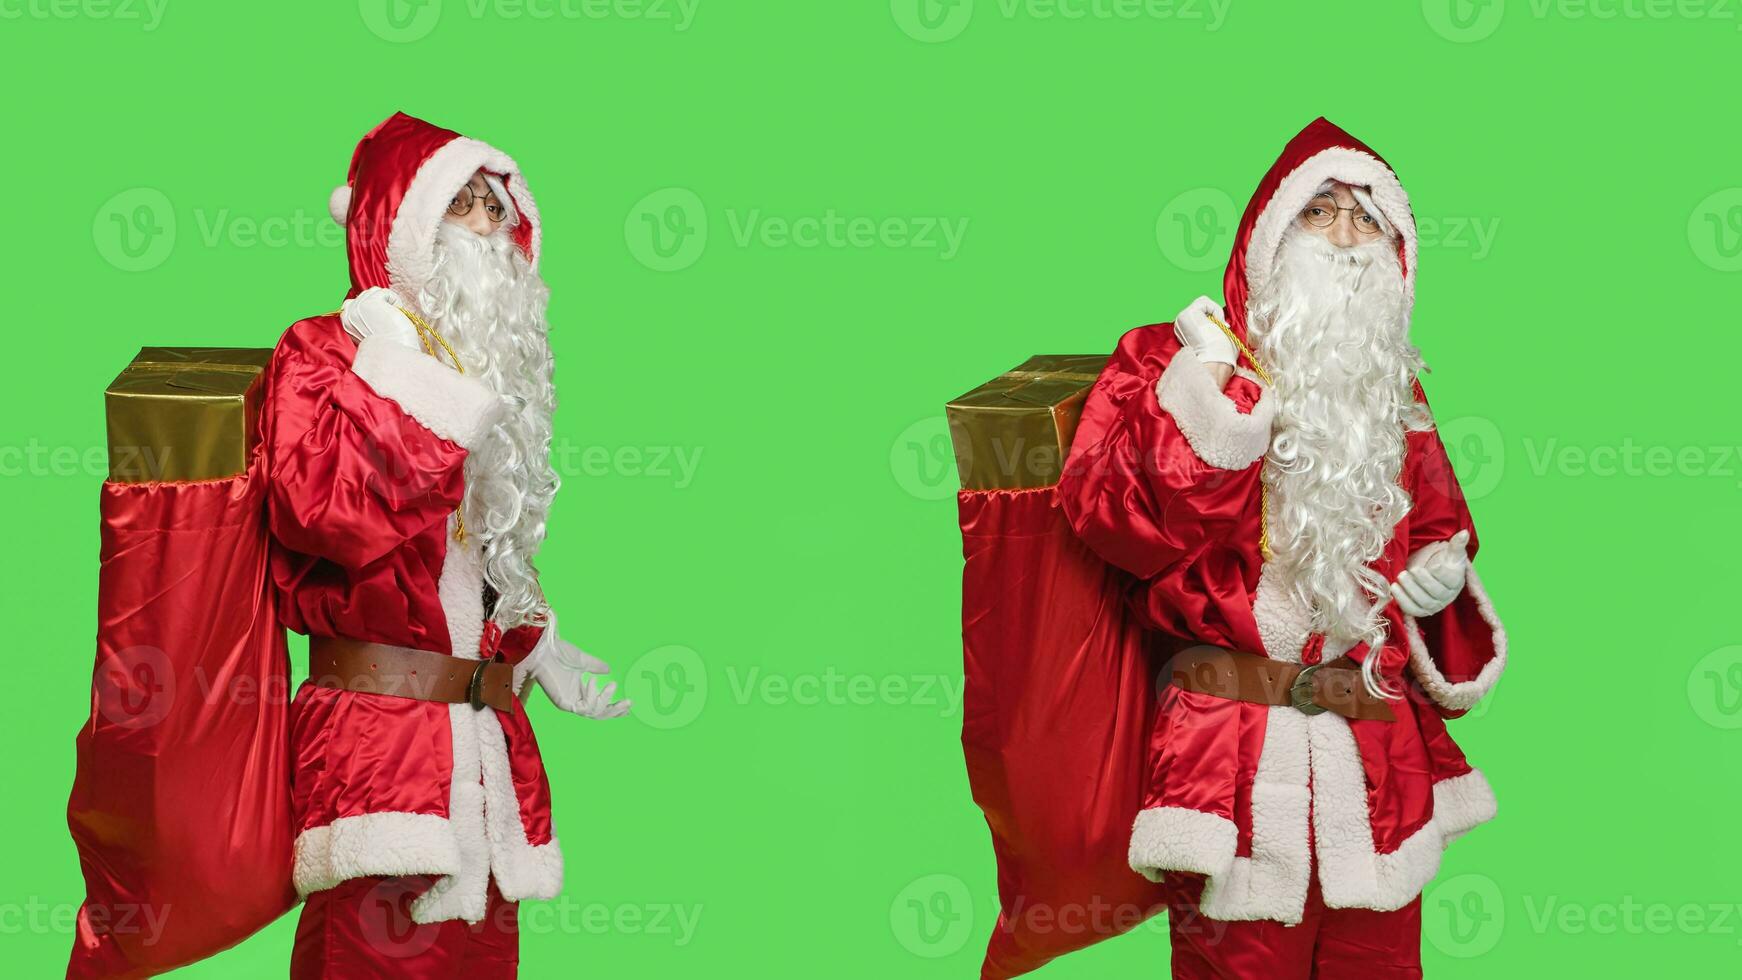 Santa claus cosplay shows marketing ad against greenscreen backdrop, posing with bag of gifts to advertise winter holiday season with main character. Father christmas red costume. photo